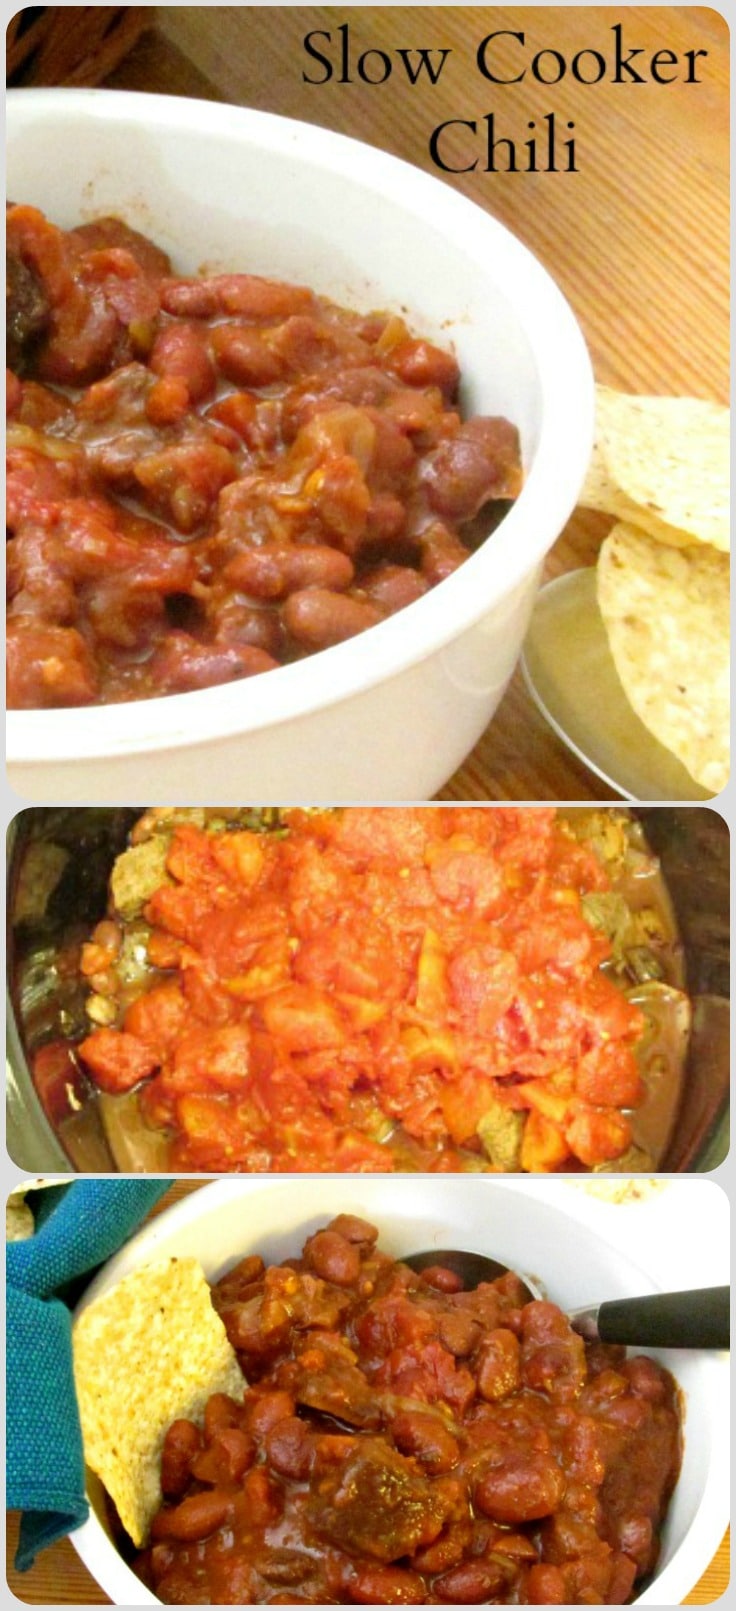 Make a large slow cooker full of chili, for a party, for the freezer, for a series or delicious quick meals! 